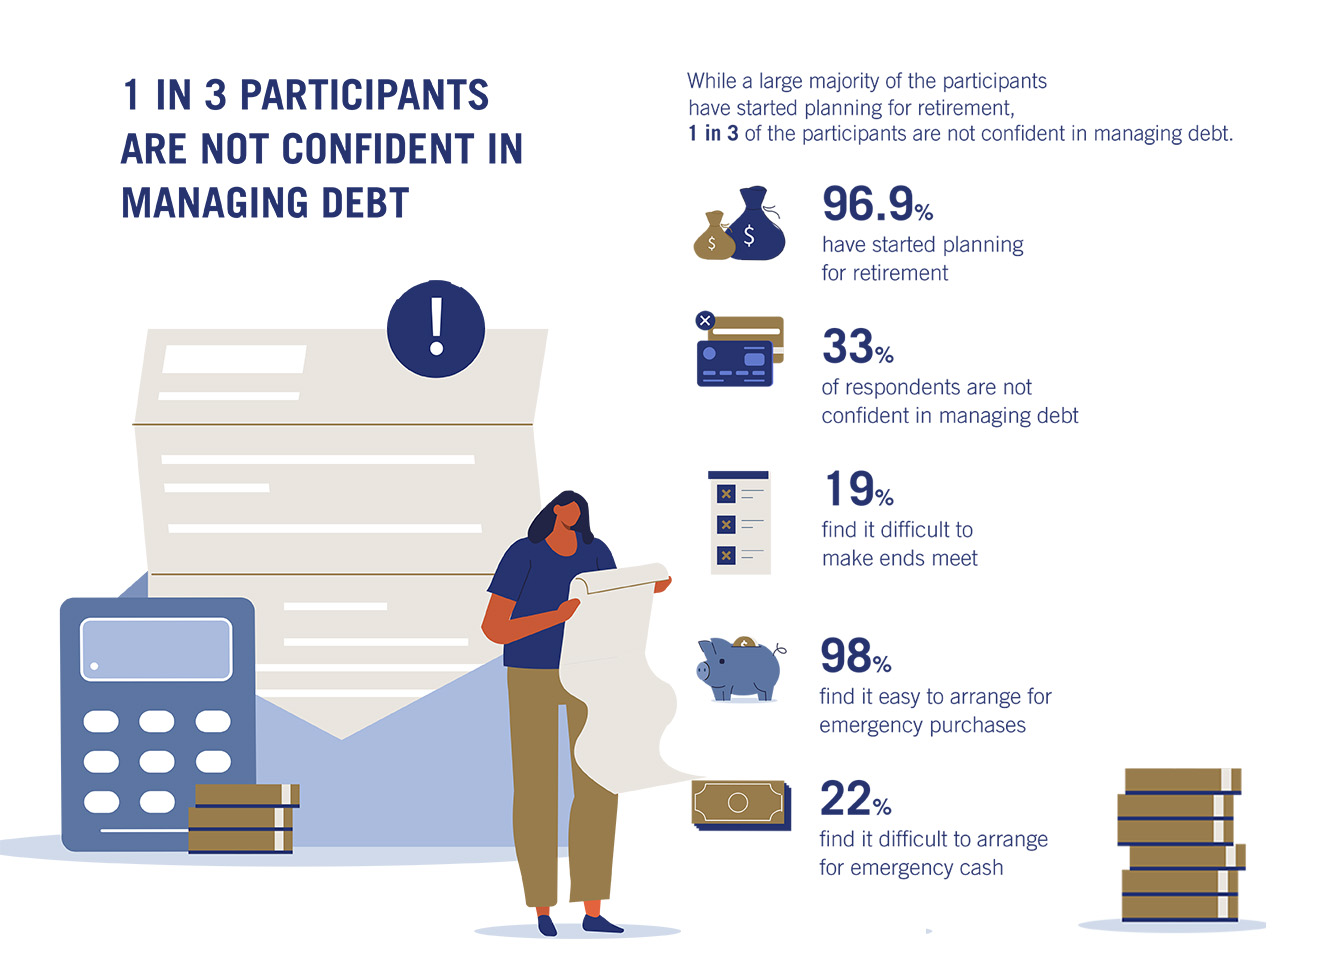 1 in 3 participants are not confident in managing debt